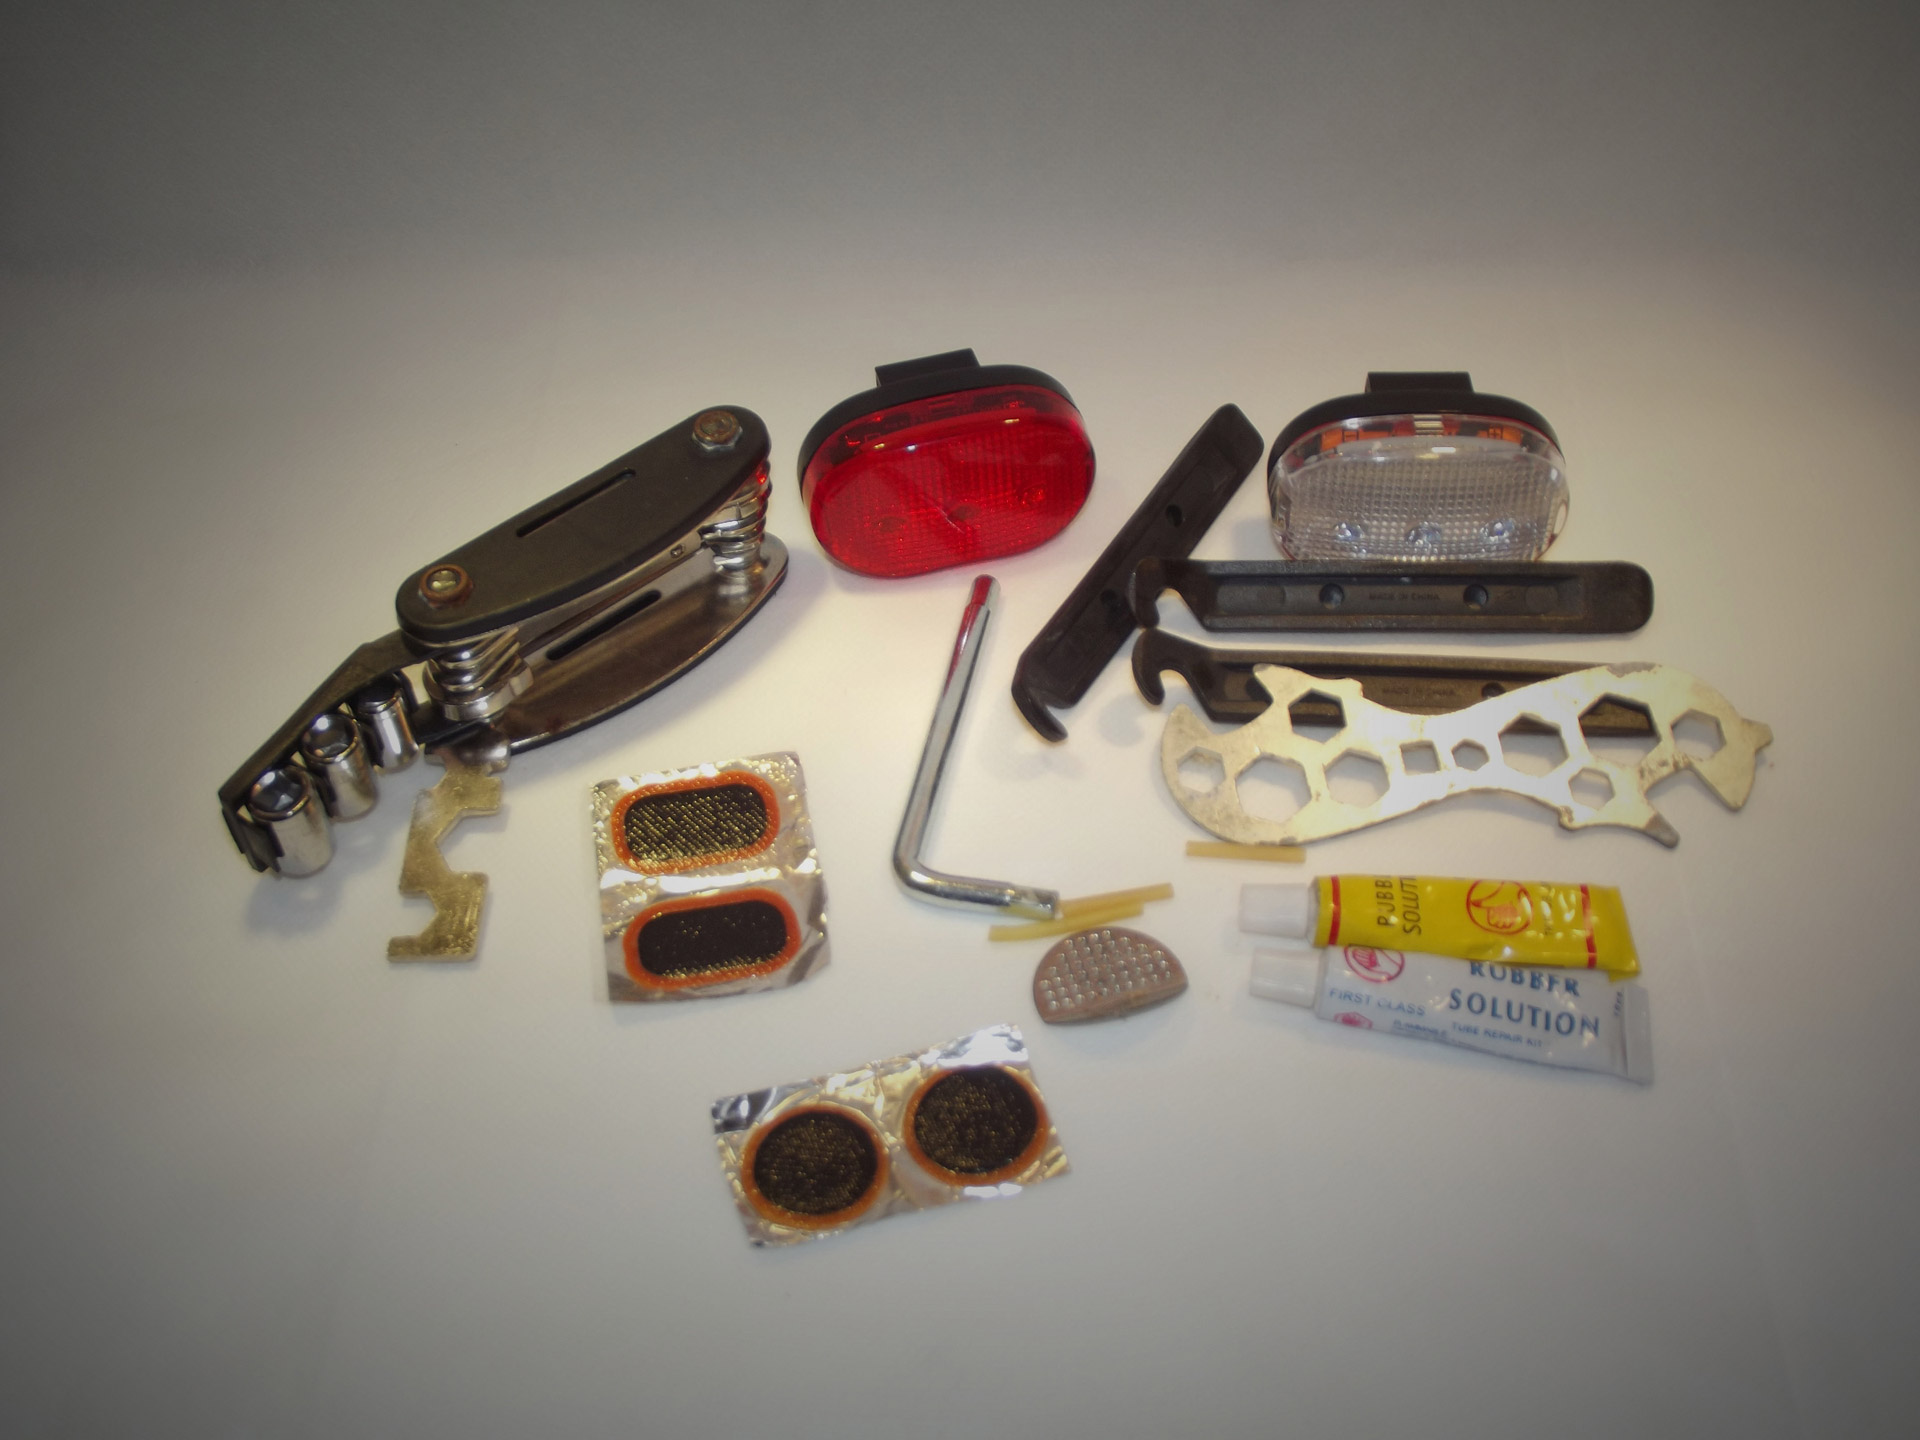 sockets puncture puncture repair kit free photo